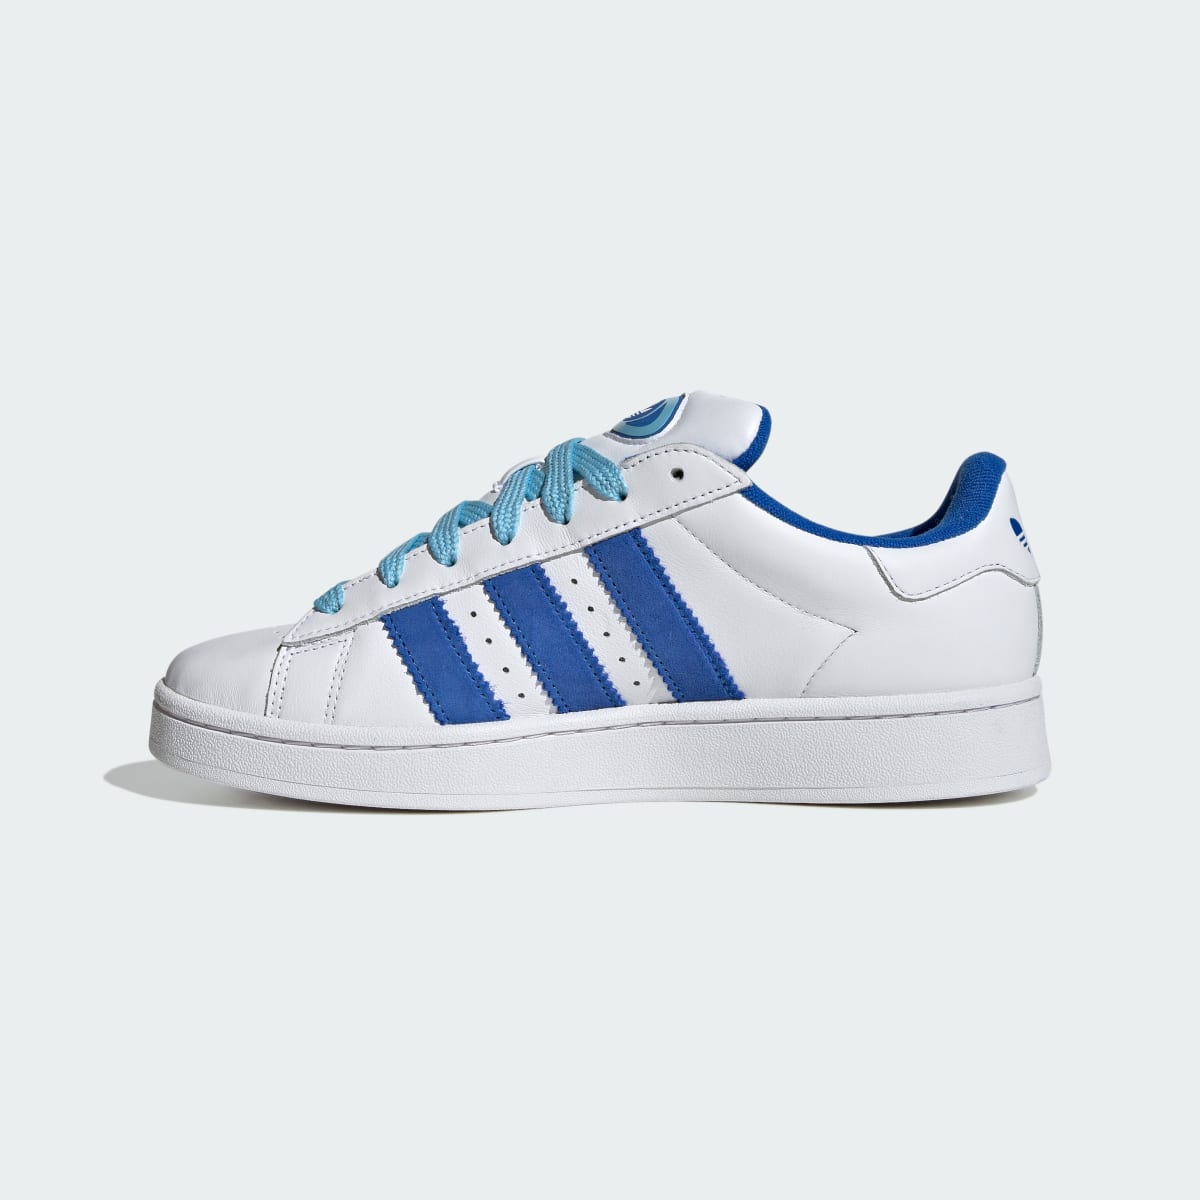 Adidas Campus 00s Shoes. 11